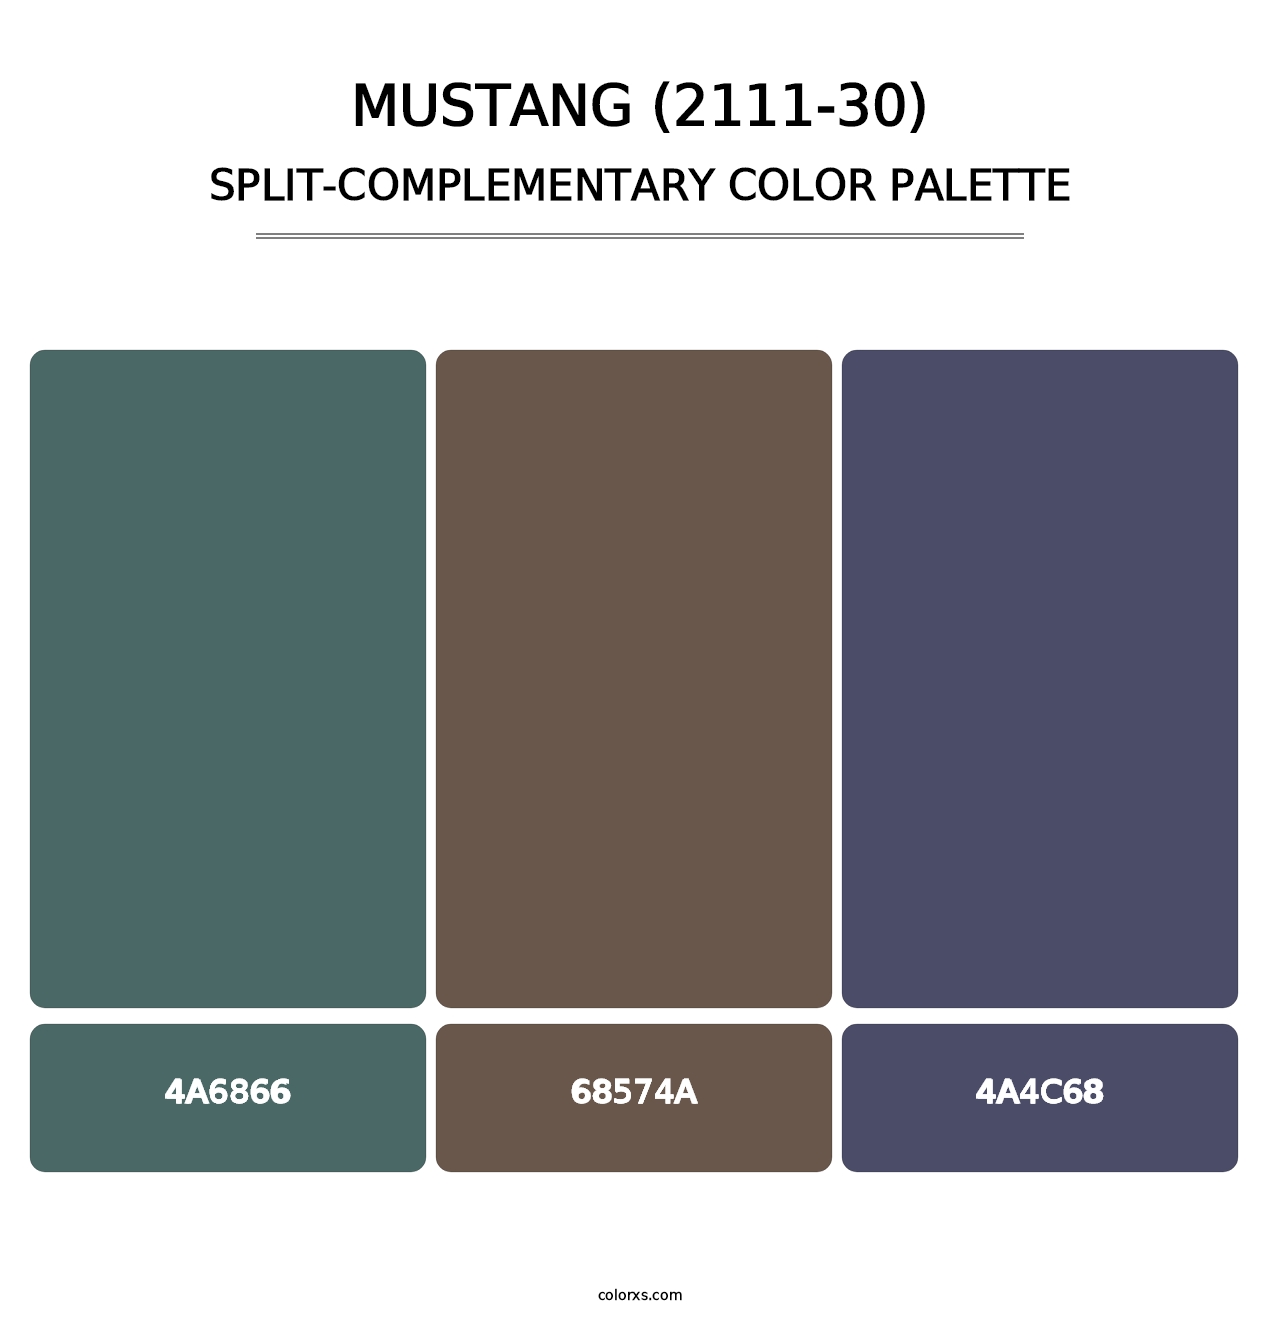 Mustang (2111-30) - Split-Complementary Color Palette